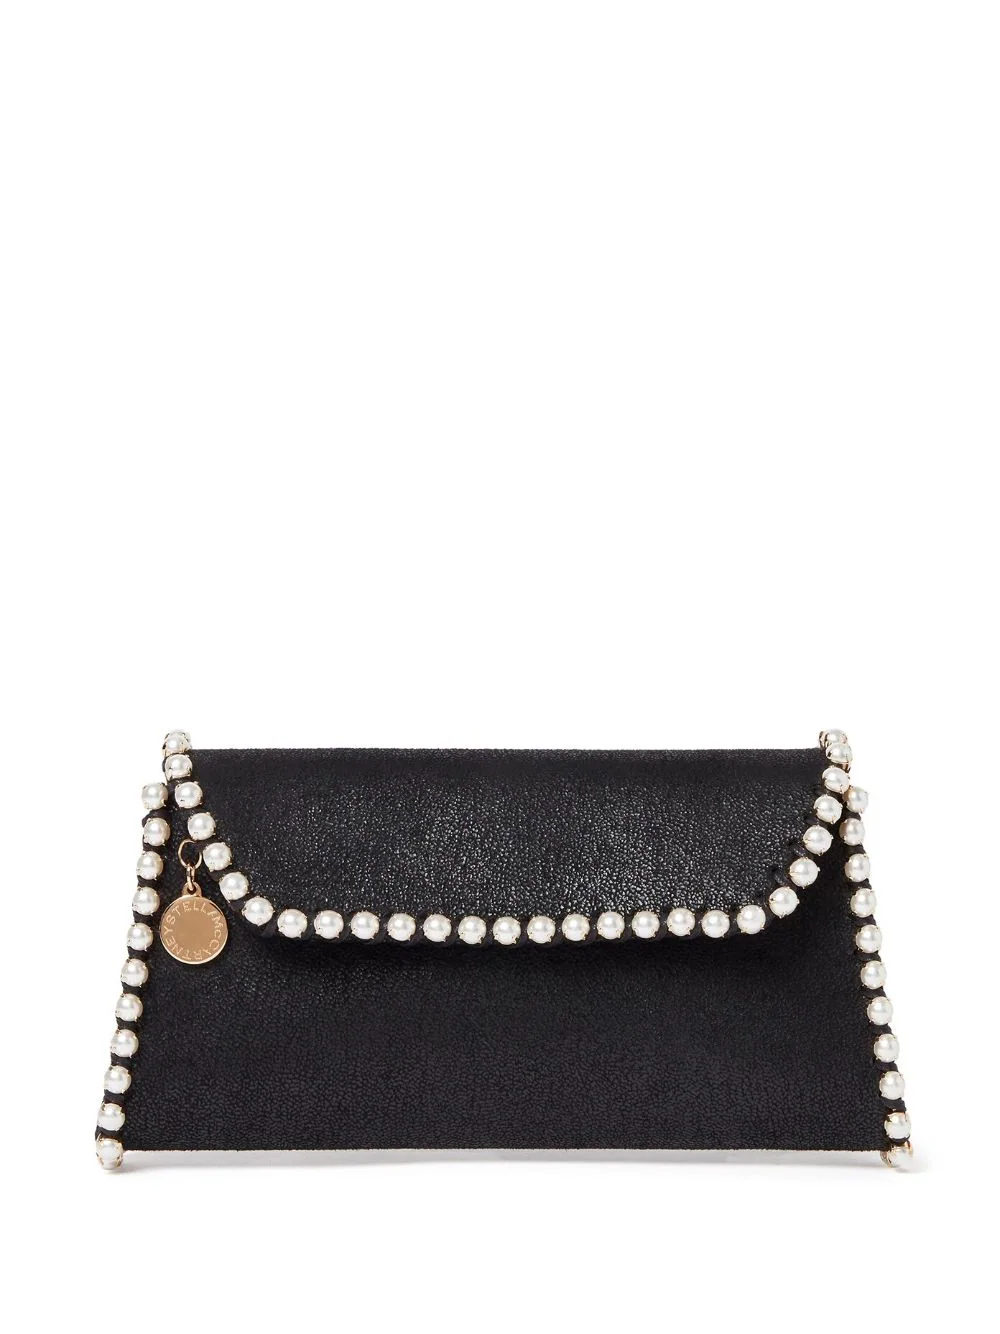 Stella-Mccartney-Pouch-Shaggy-Deer-With-Pearl-Chain-Black-1